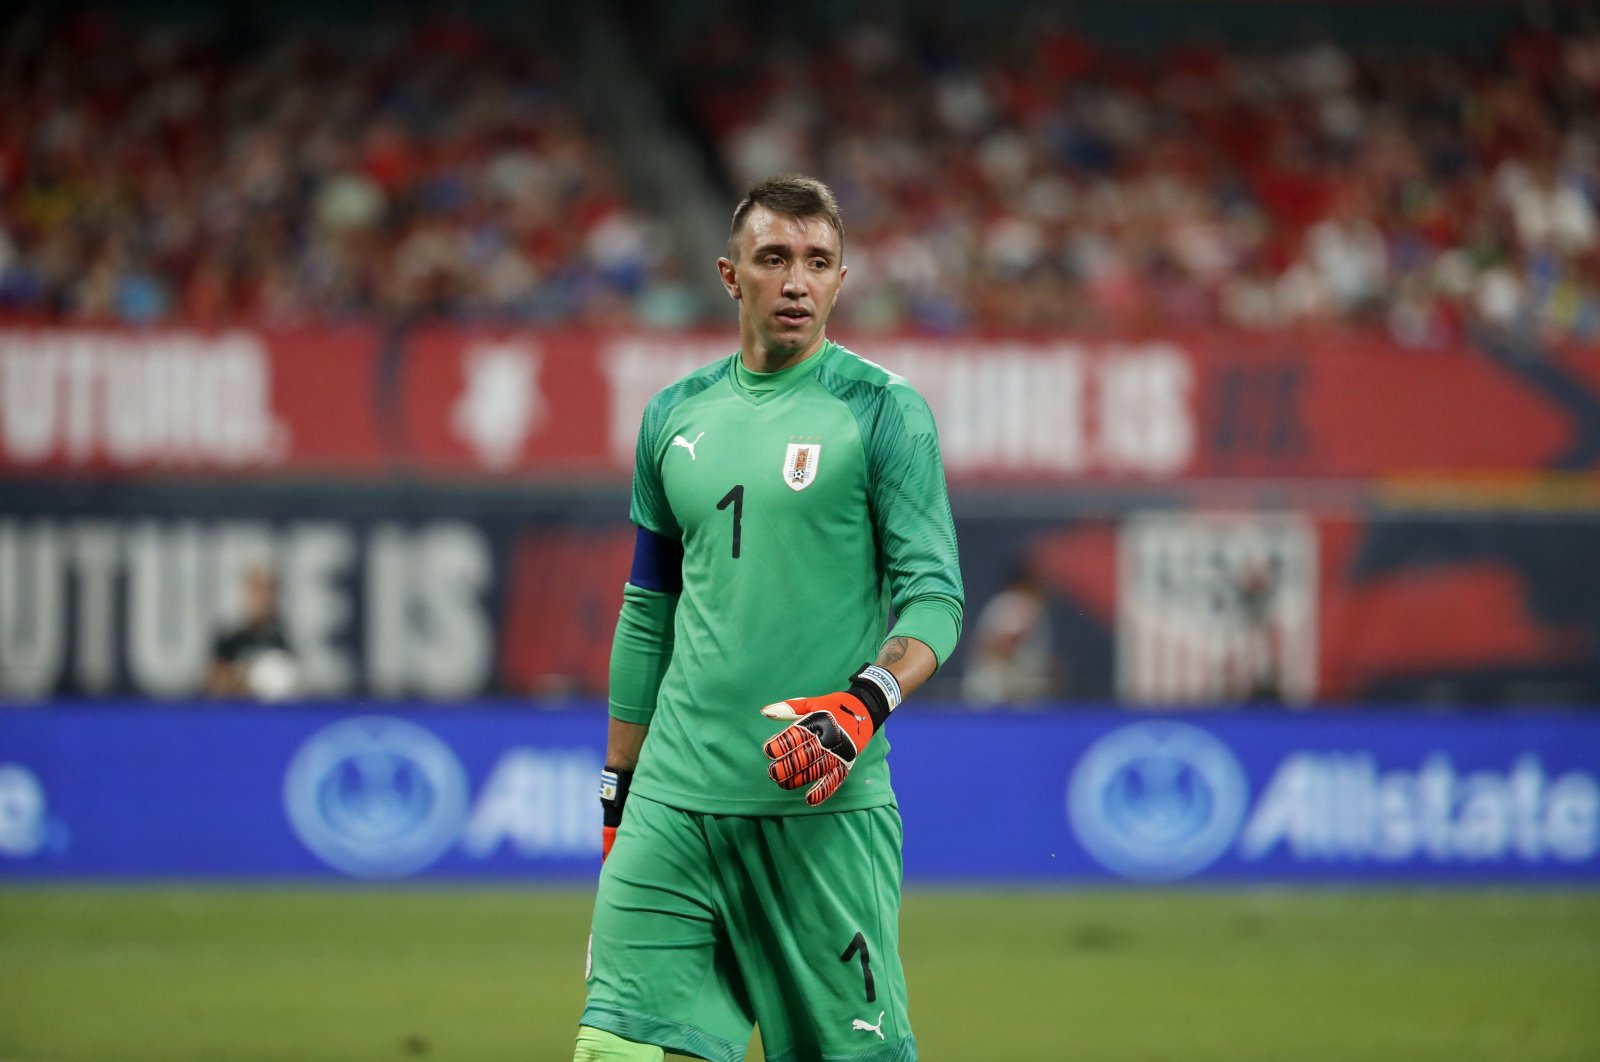 Uruguay goalkeeper Fernando Muslera is seen during the second half of a friendly football match against the United States, in St. Louis. Sept. 10, 2019. (AP File Photo)